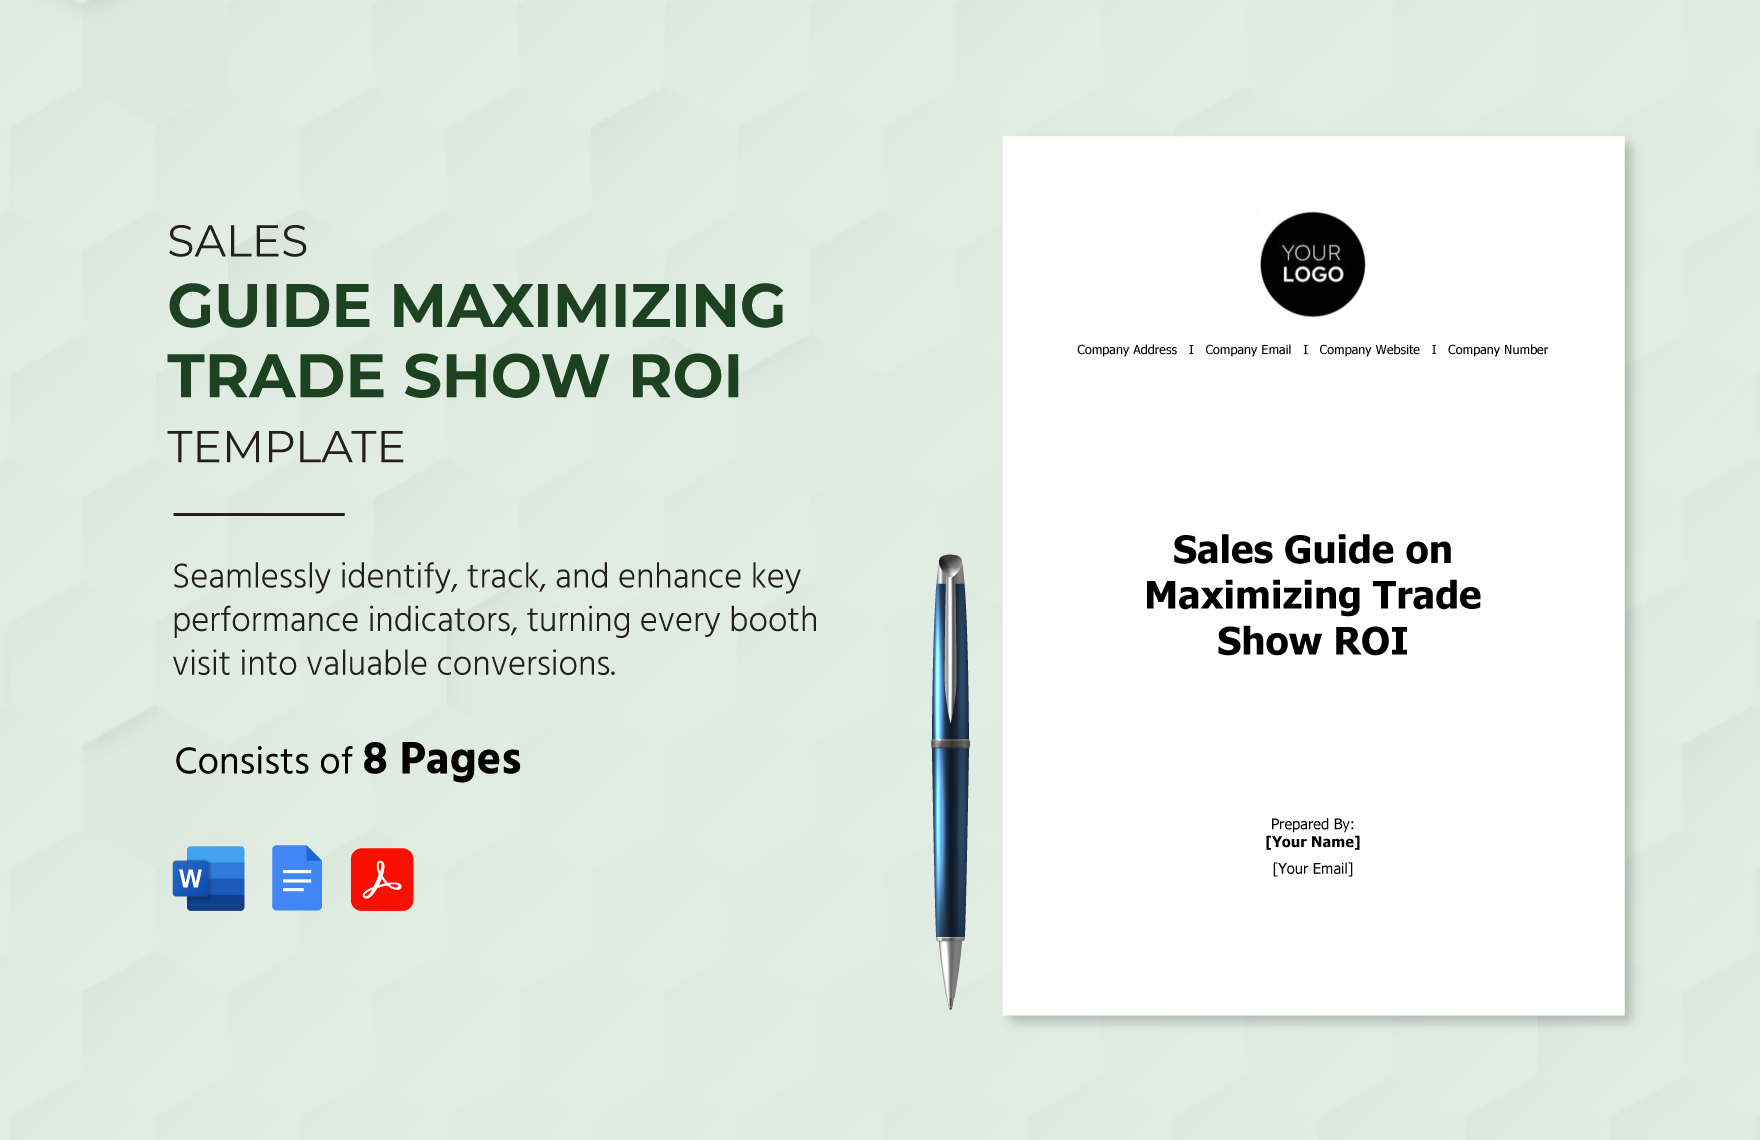 Sales Guide on Maximizing Trade Show ROI Template